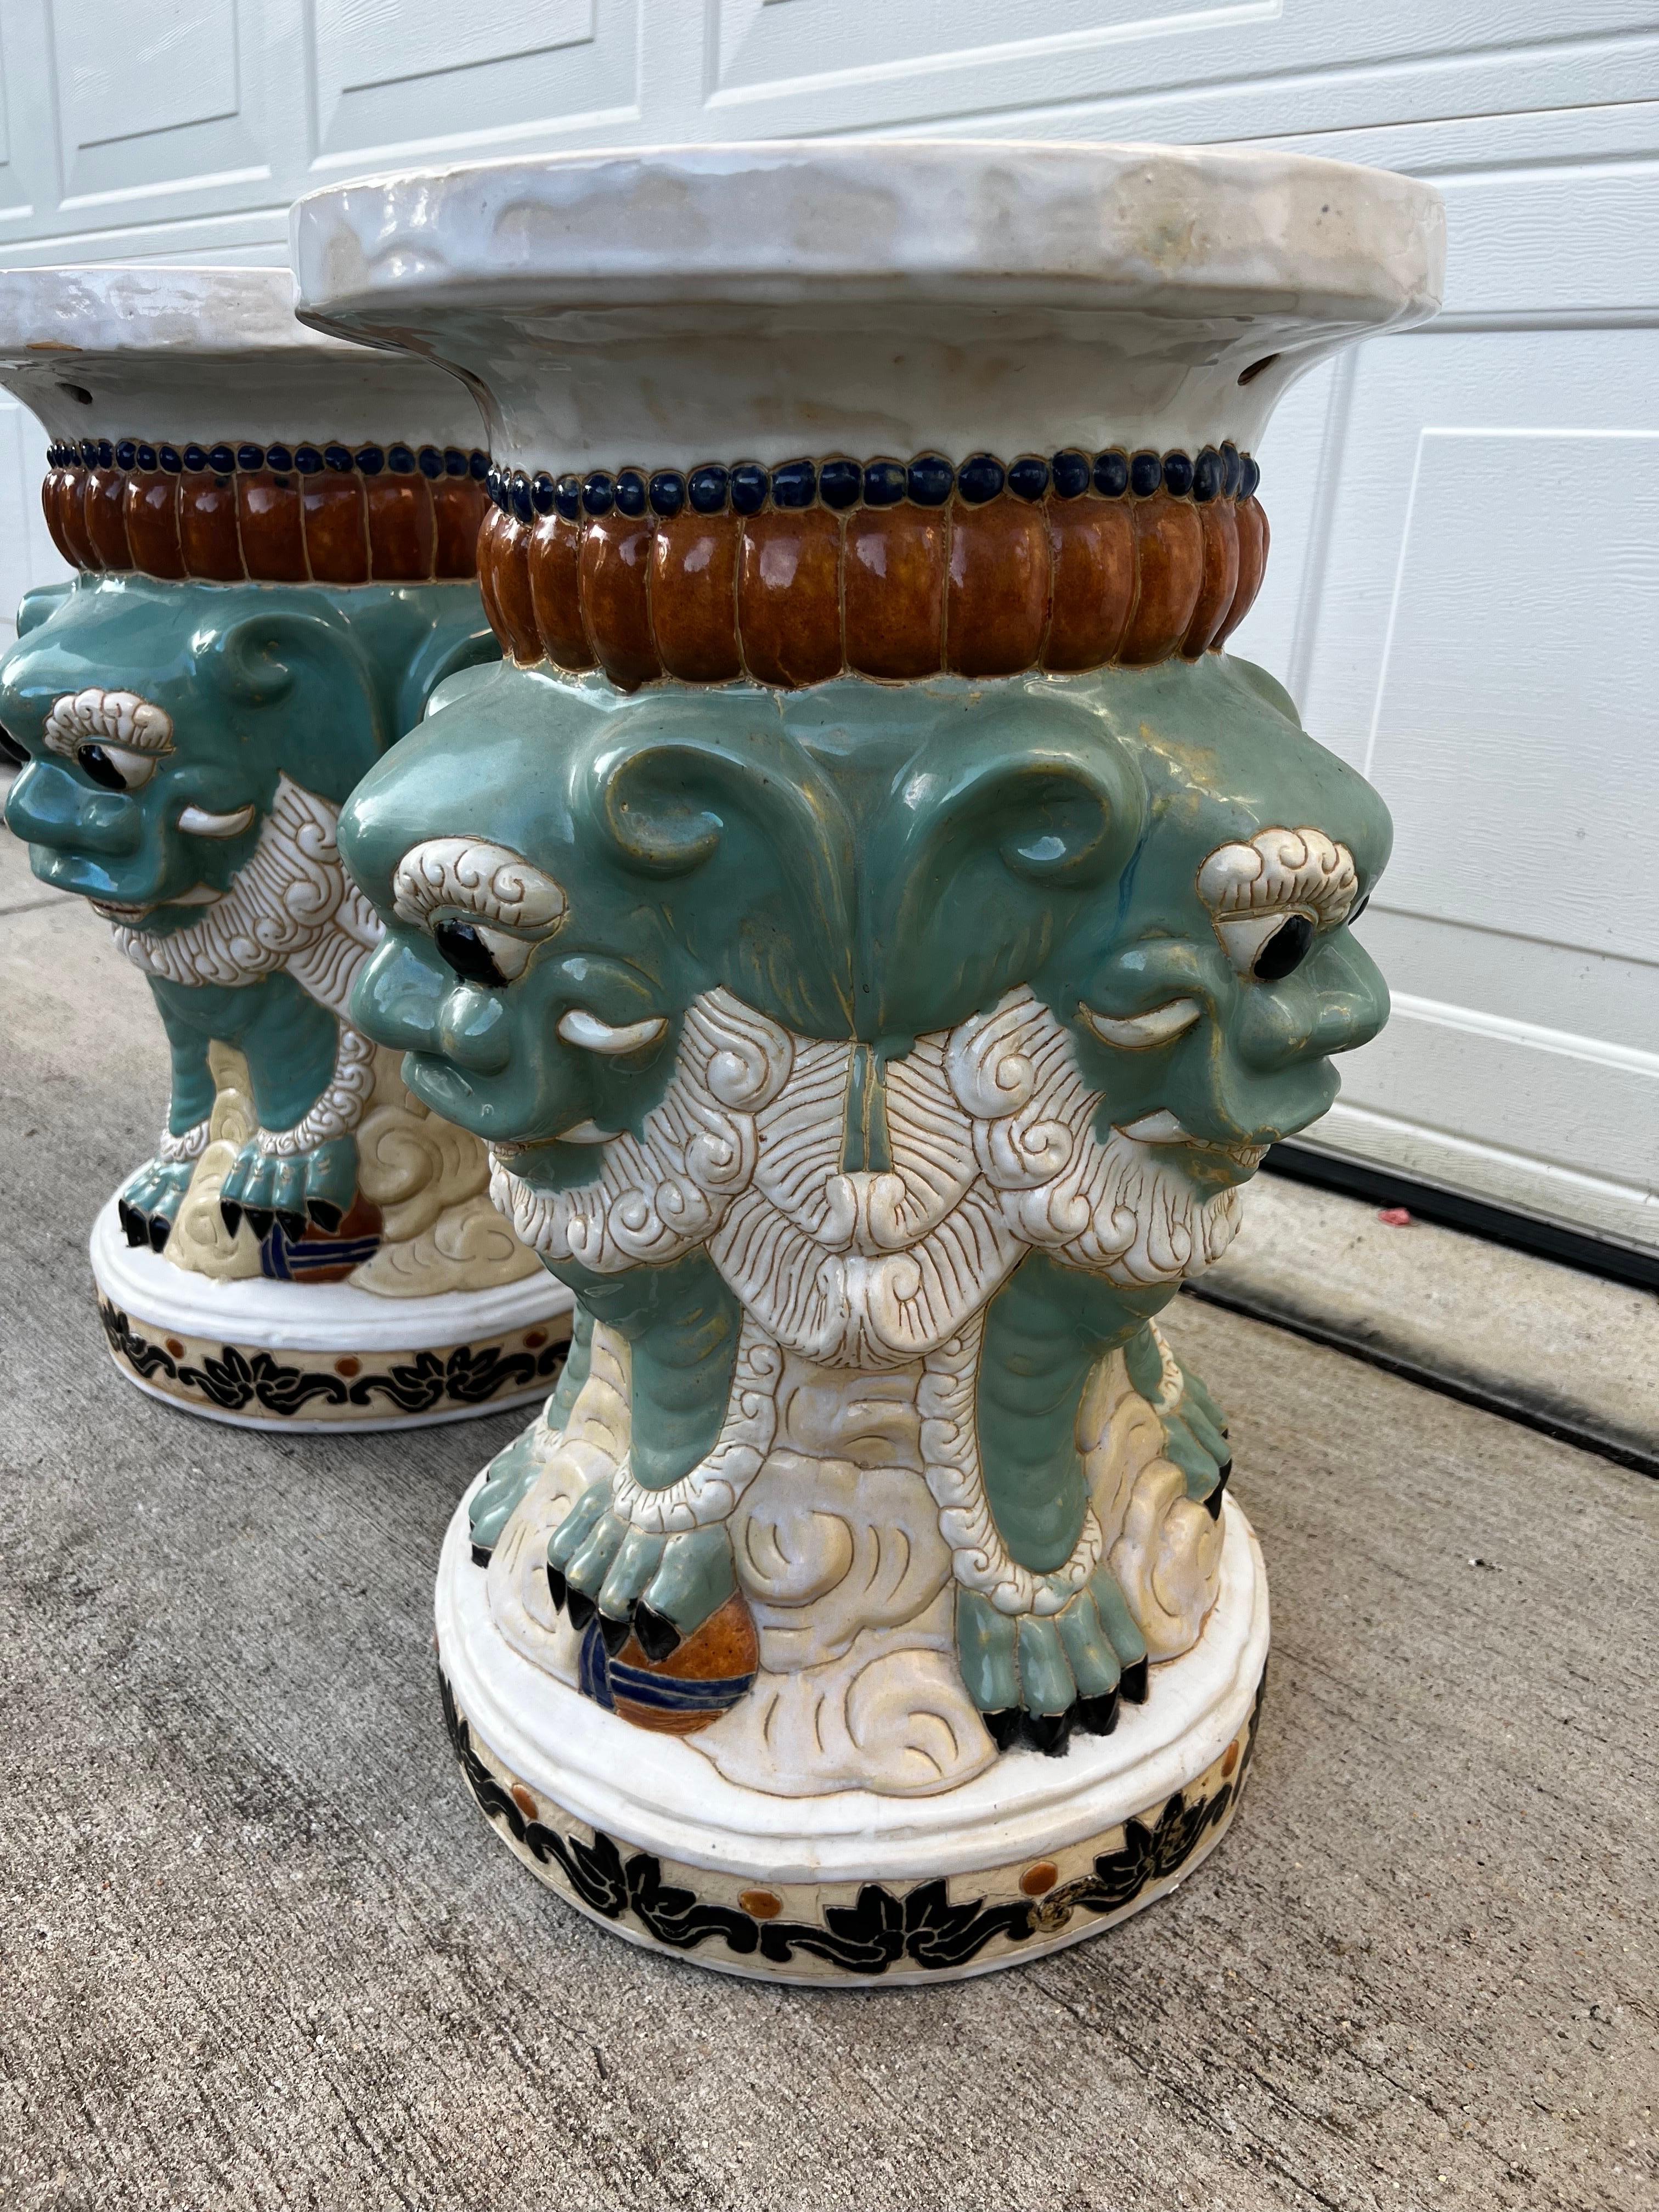 Stunning rare pair of a 3 face foo  dog garden stools, beautiful details and gorgeous colors. Teal, black, burgundy and white. This pair could be use indoor or outdoor 
Very unique way to add an Asian decor item to your home 
Please visit my store